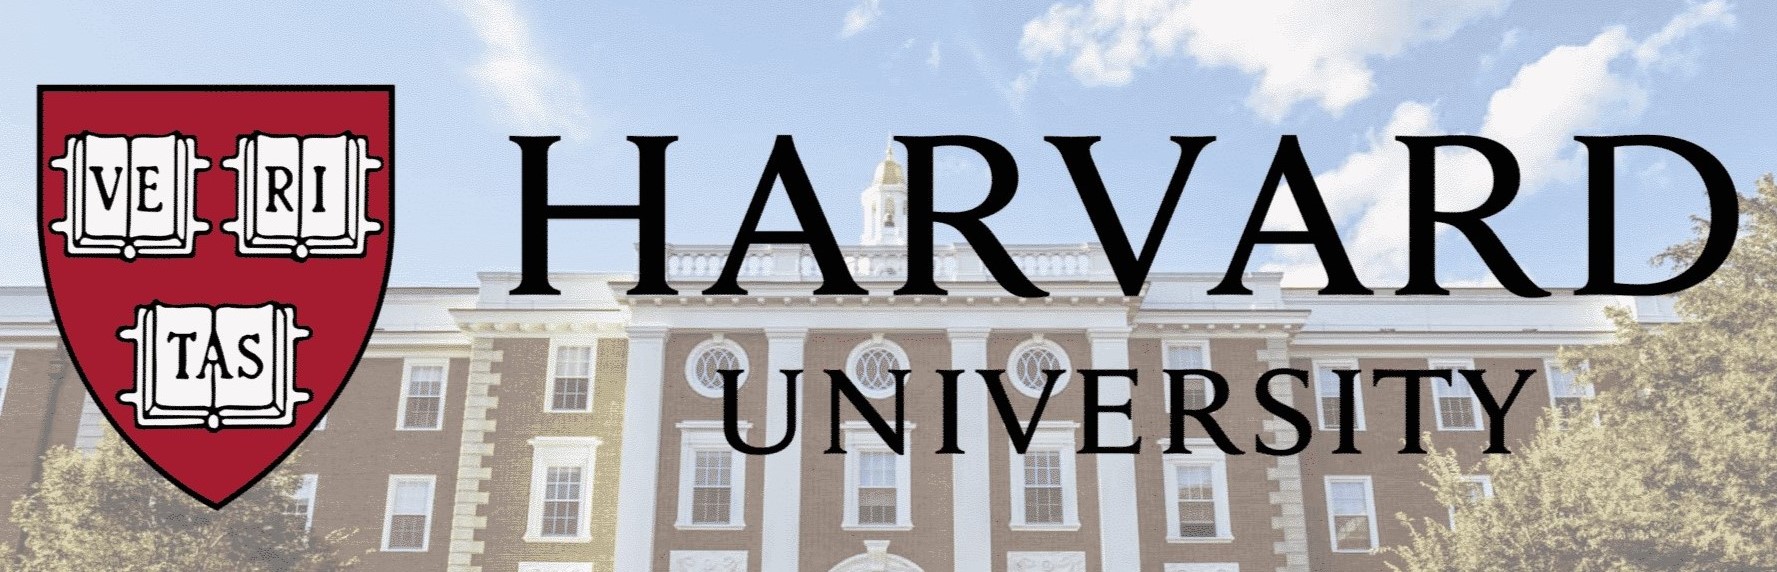 16 Surprising Facts About Harvard University - Facts.net